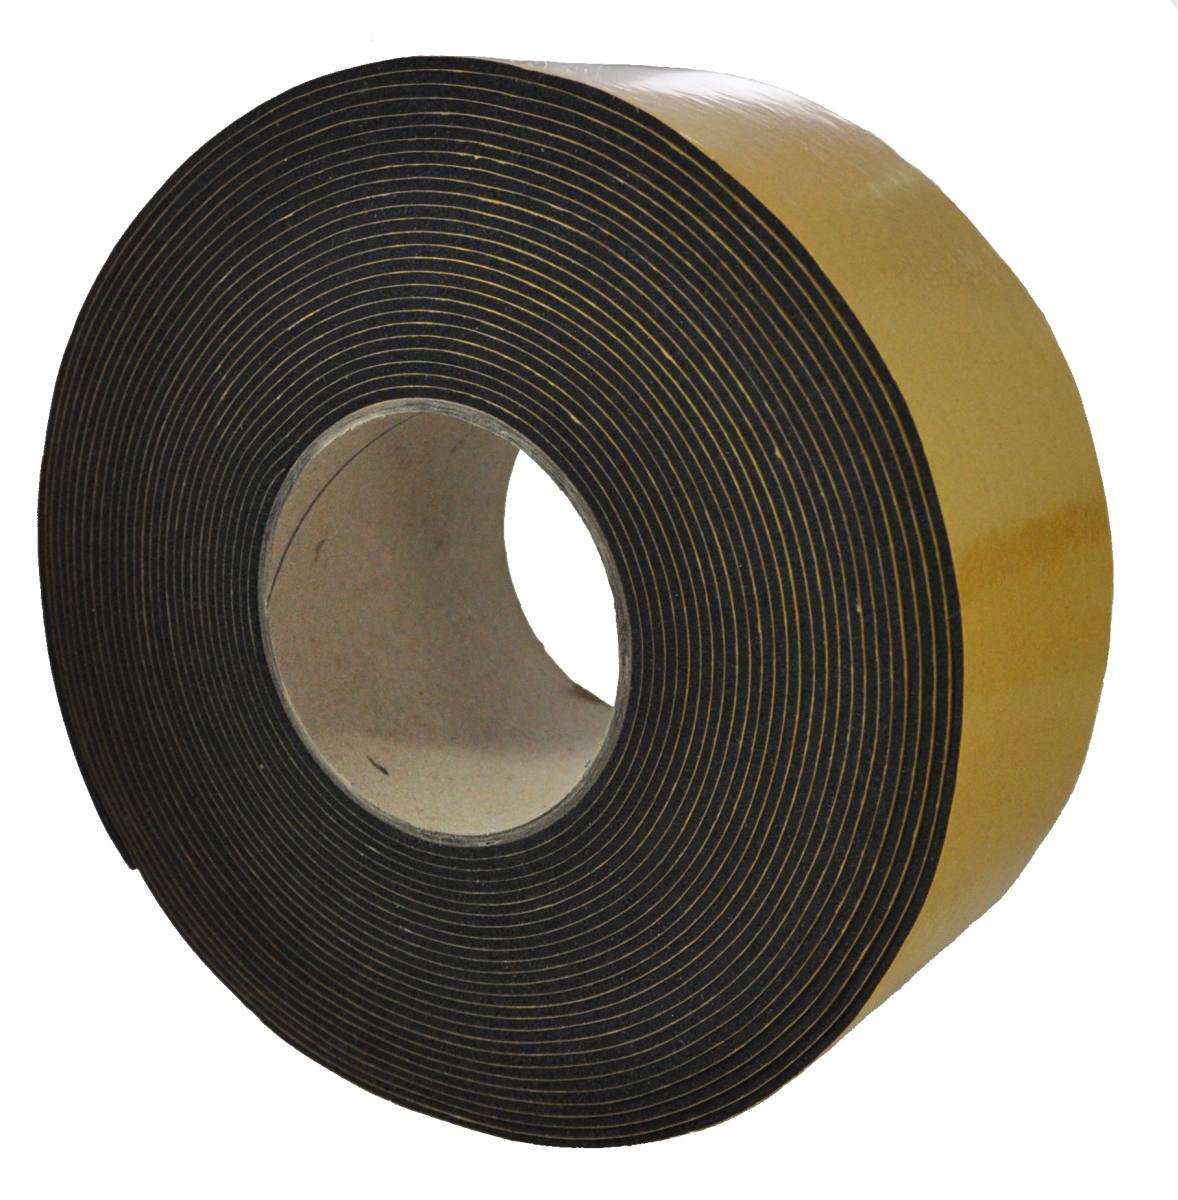 S-K-S EPDM 4mmx9mmx10m black self-adhesive on one side